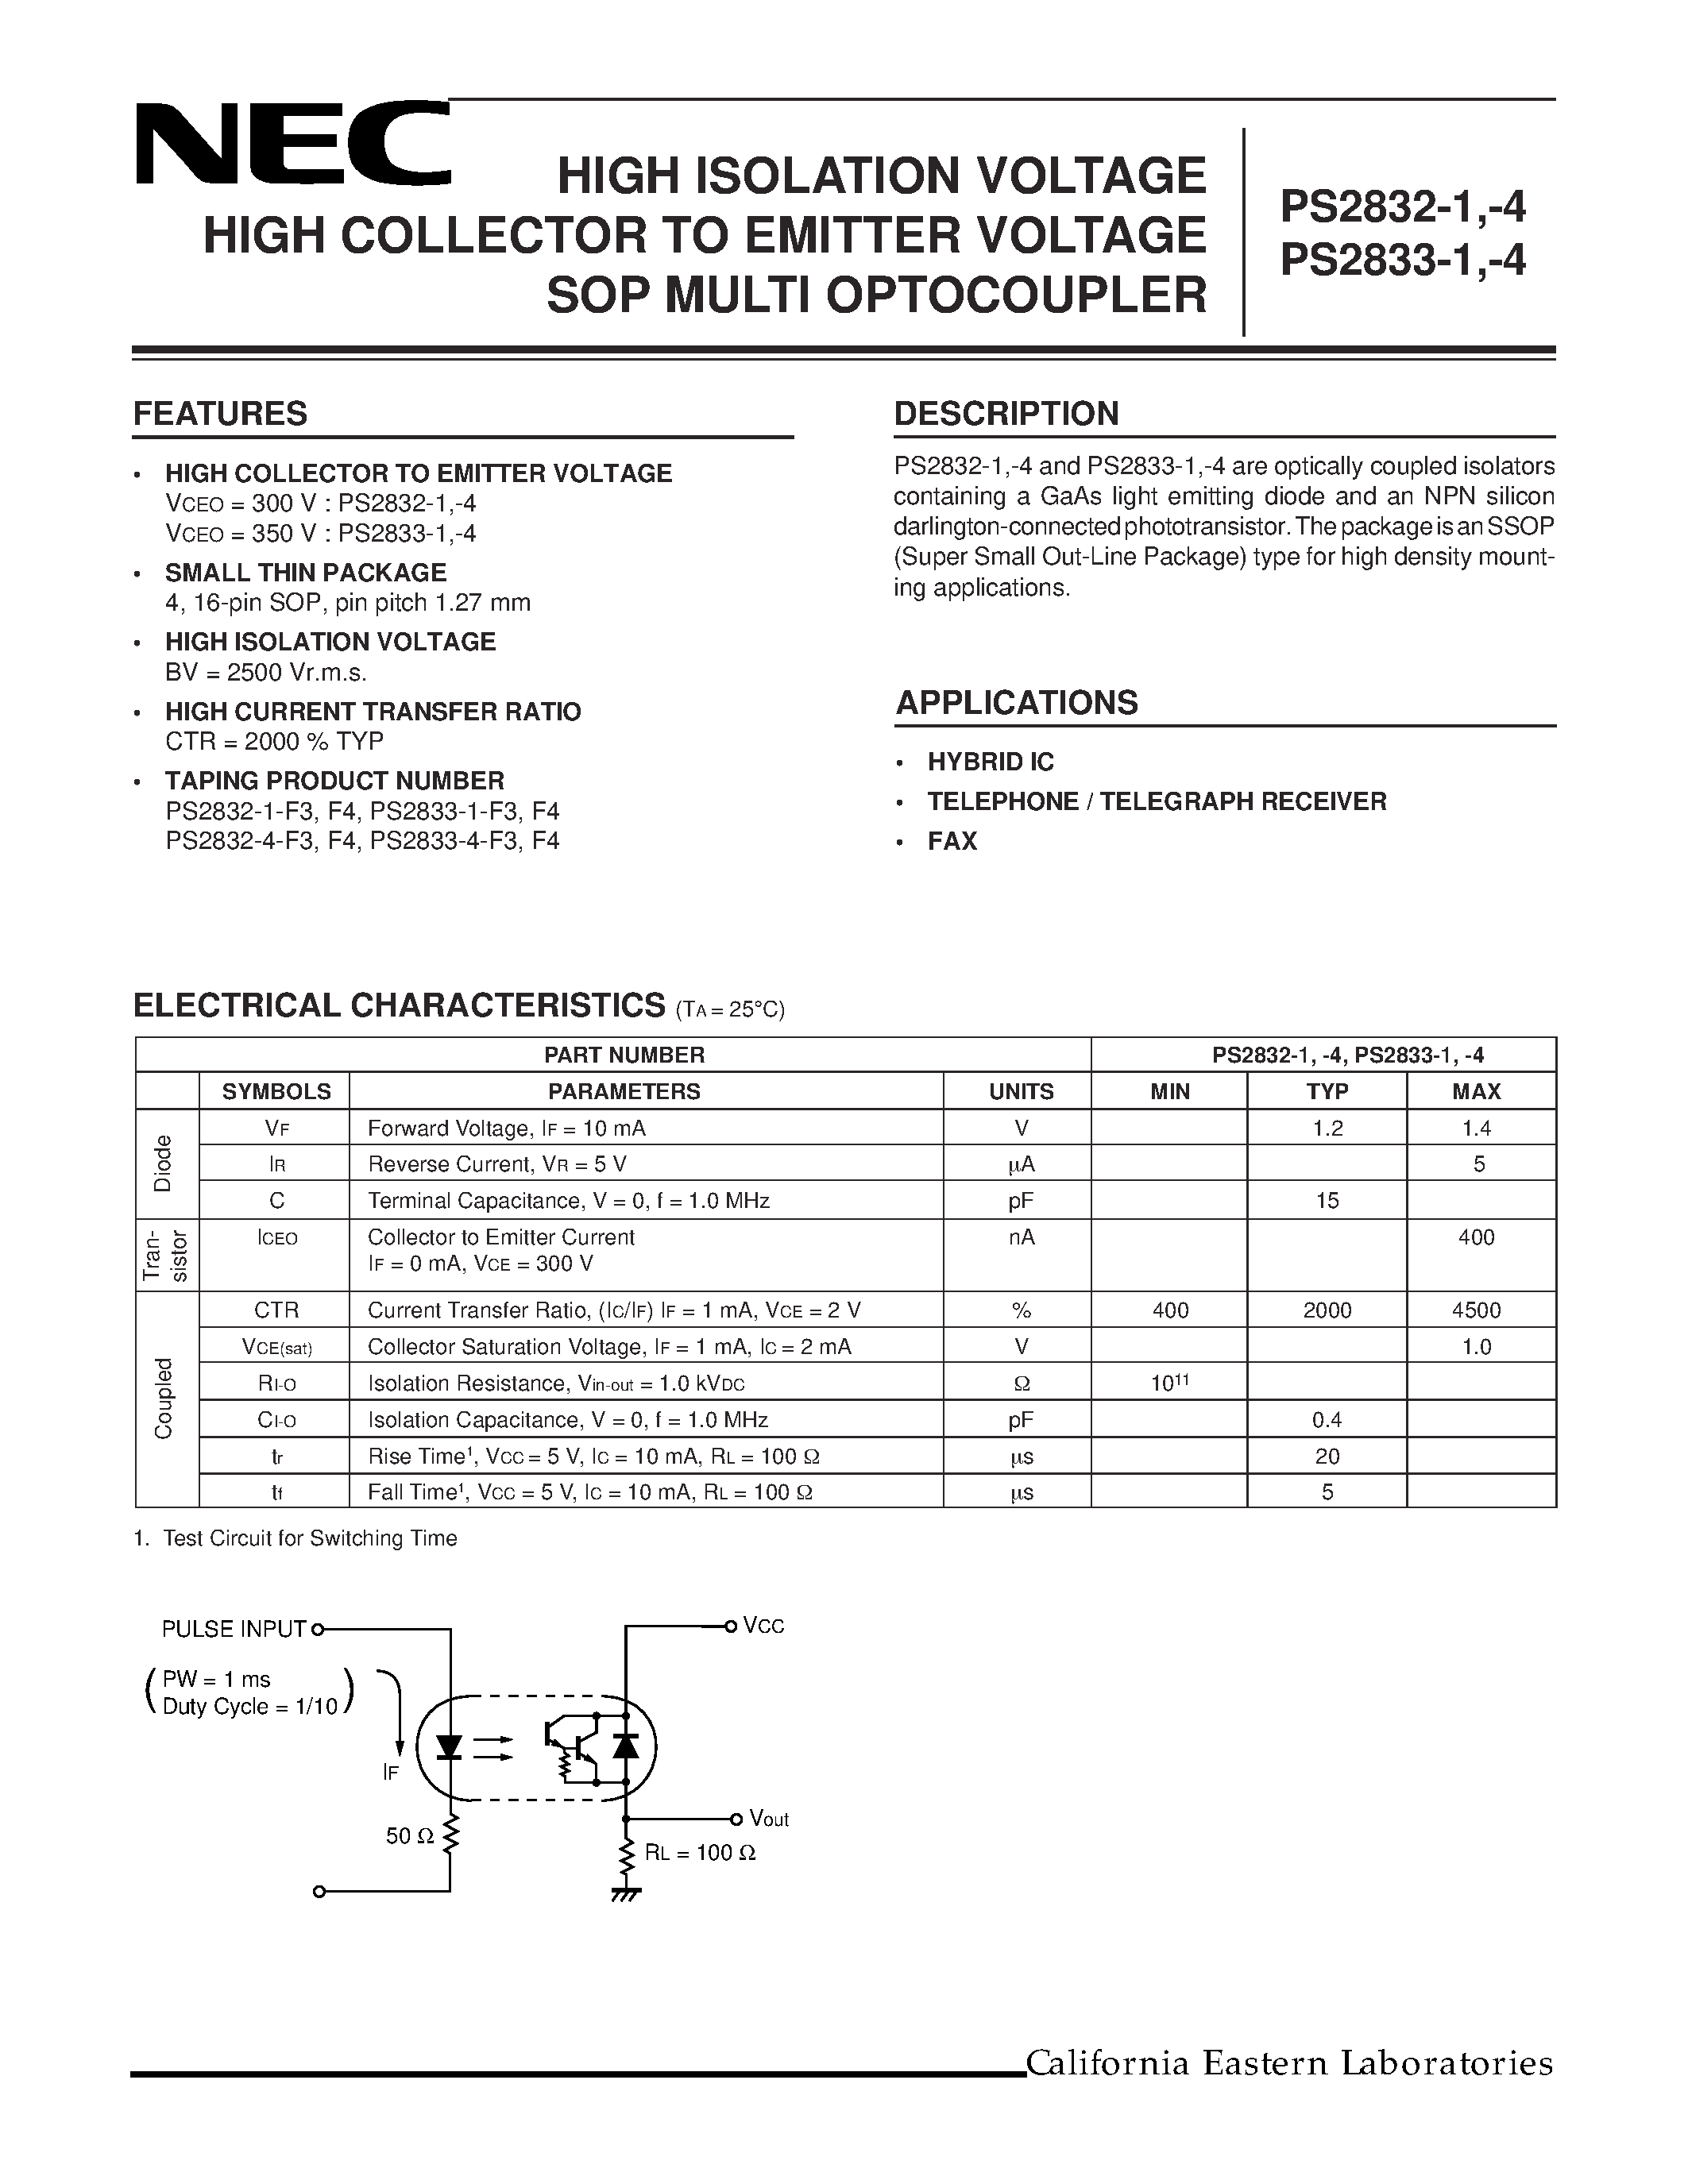 Datasheet PS2833-4-V-F4 - HIGH ISOLATION VOLTAGE HIGH COLLECTOR TO EMITTER VOLTAGE SOP MULTI OPTOCOUPLER page 1